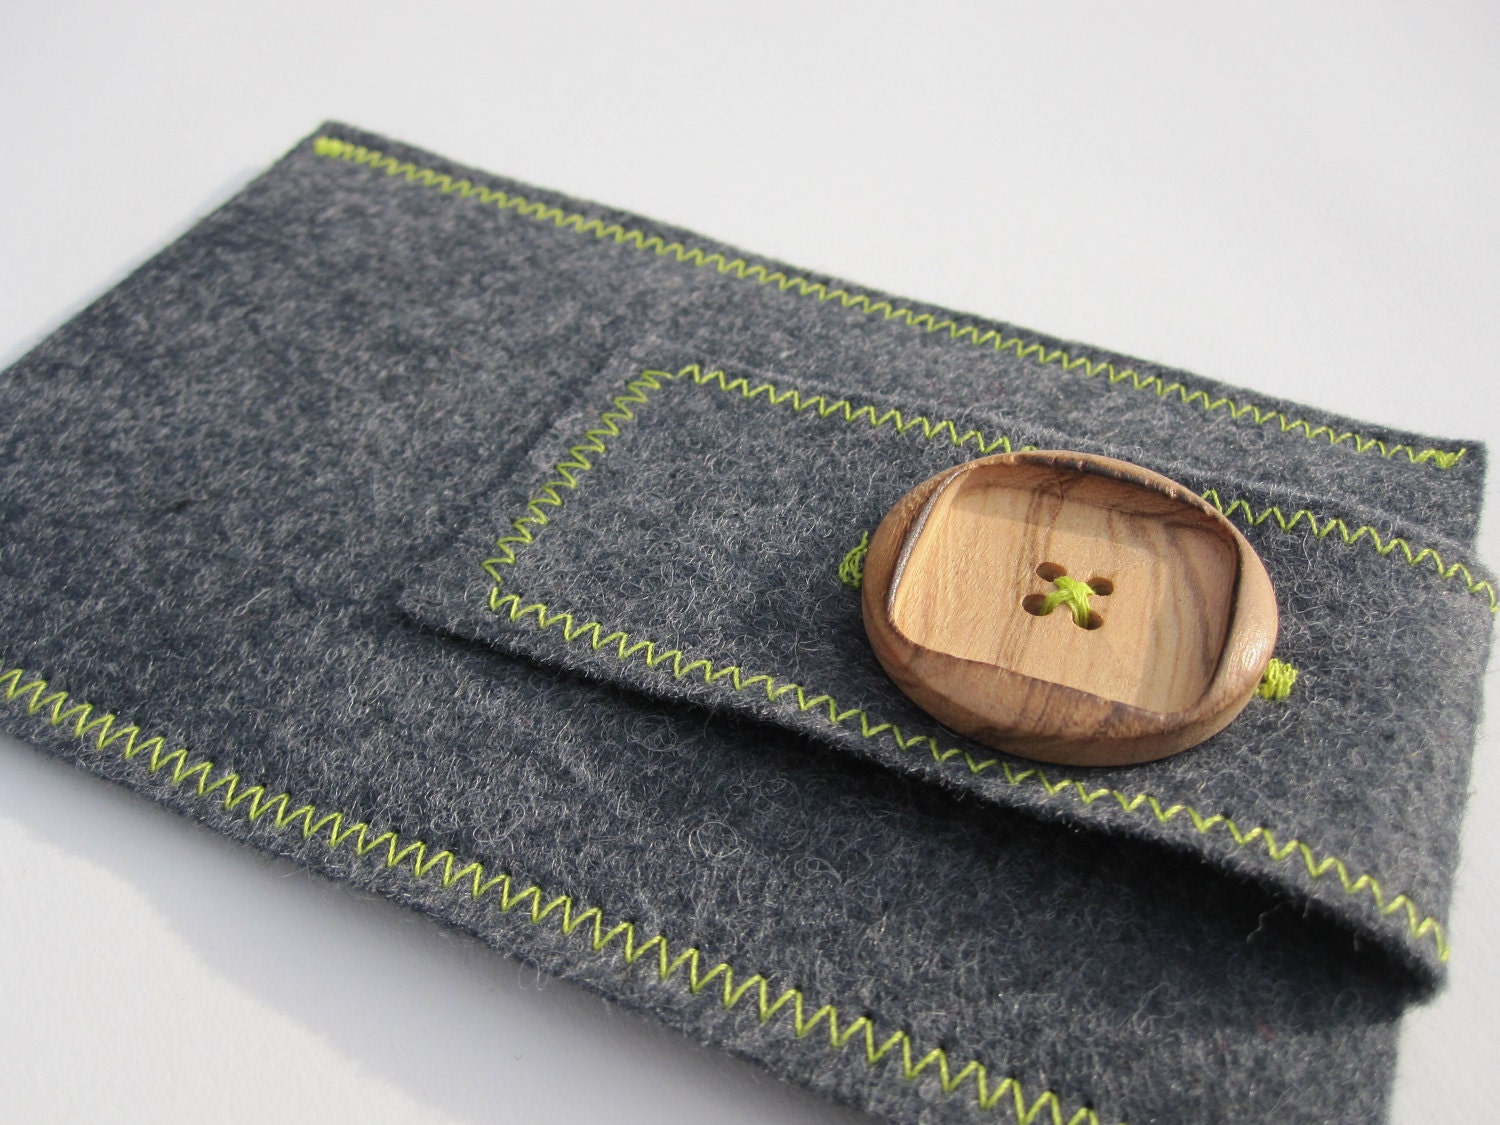 Grey Wool Felt iPhone Case / iPod Touch Case with Earphone Pocket - Lime Green Accents & Wood Button